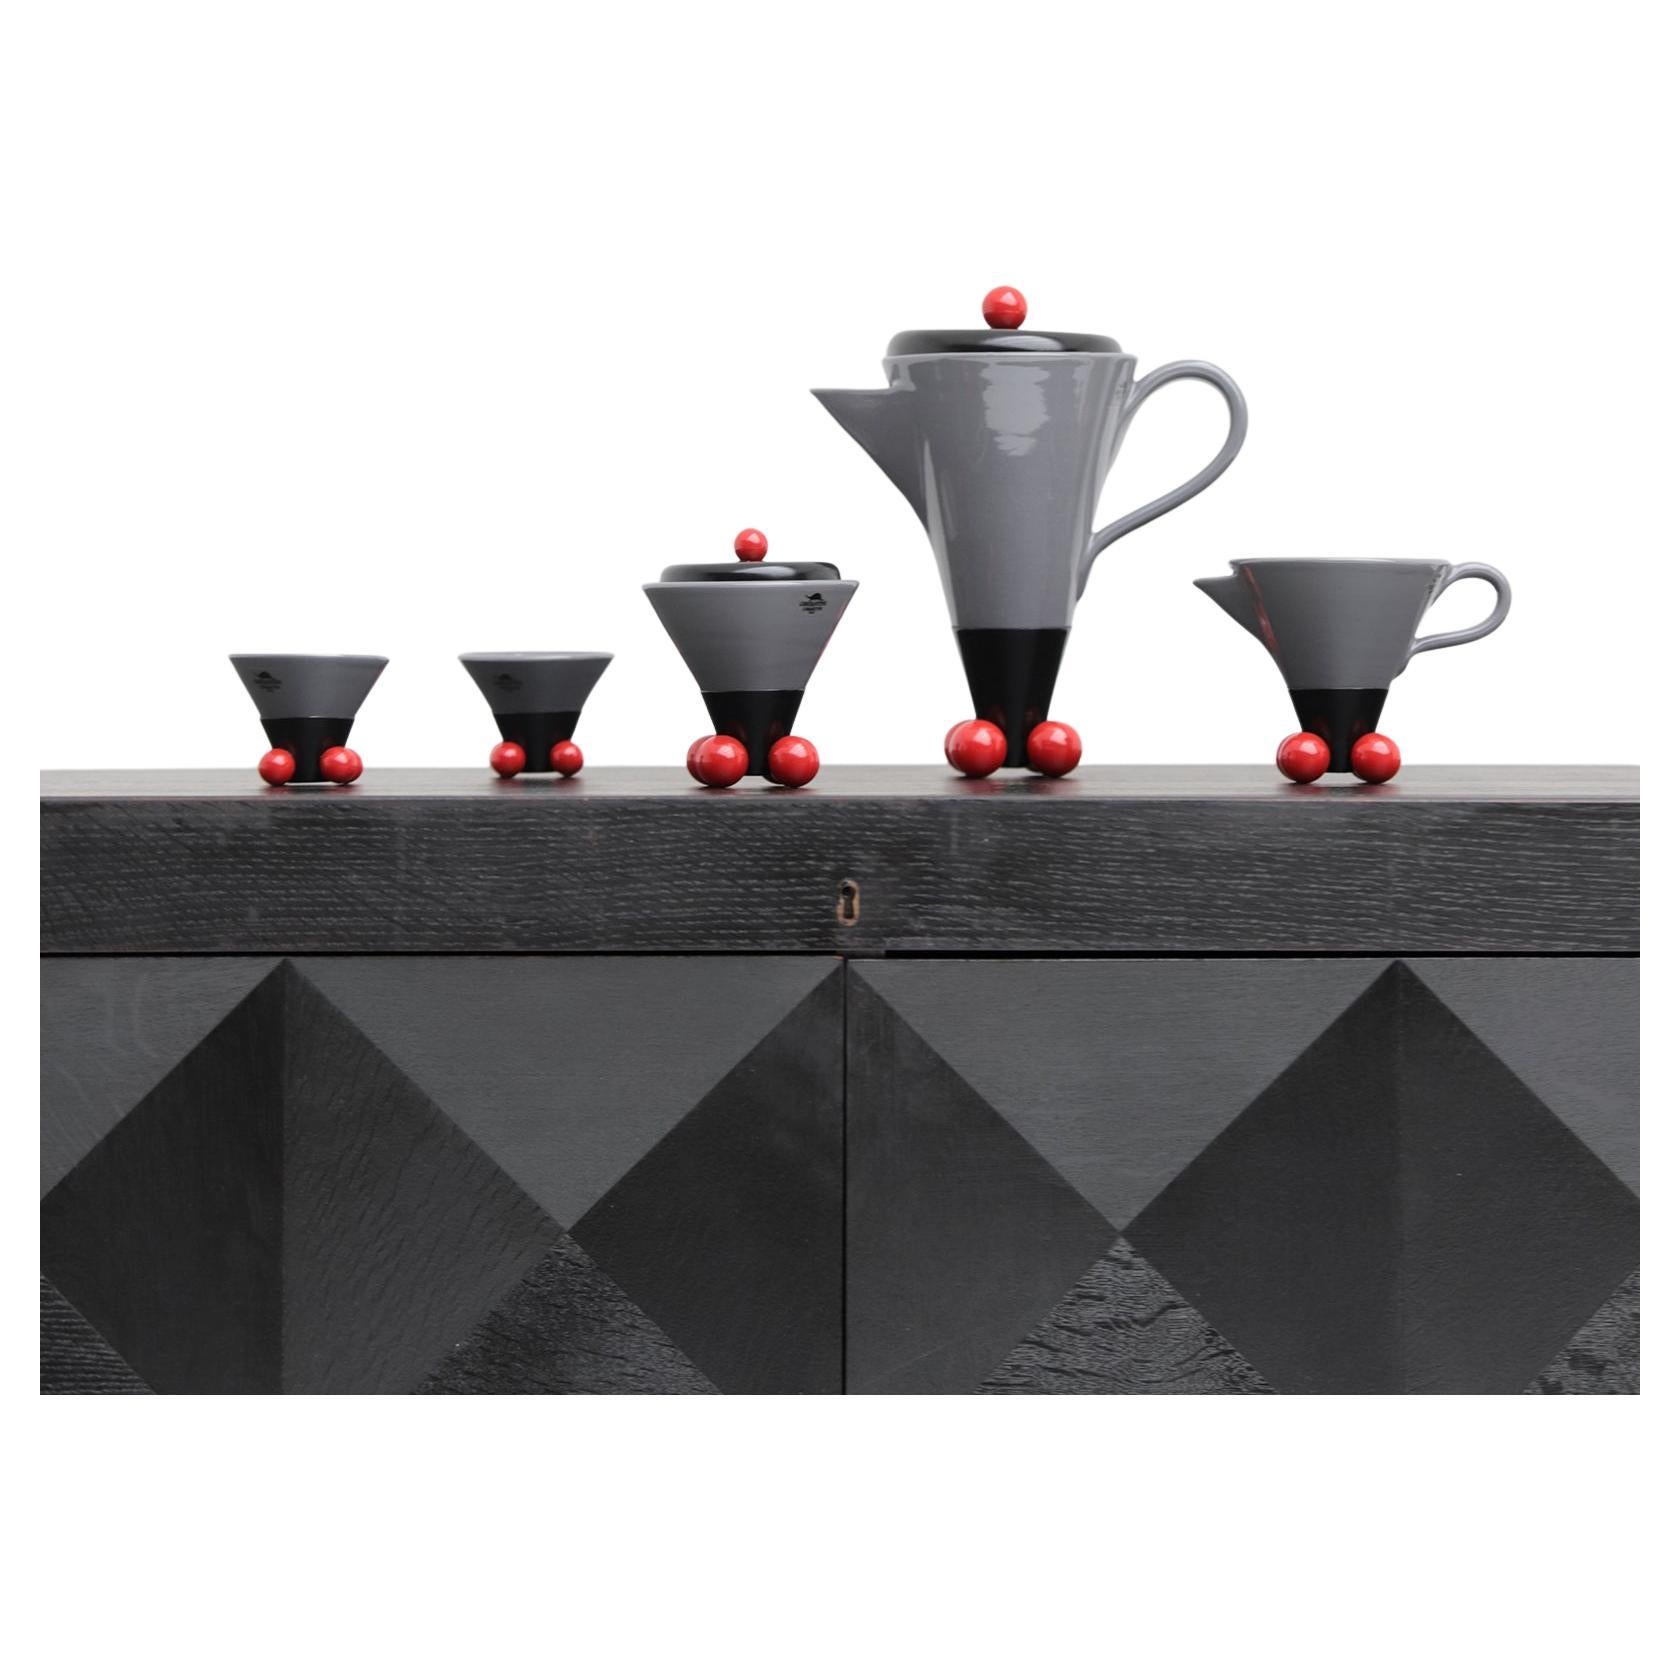 Memphis coffee set by Pietro D'Amato, manufactured by Costantini l’Oggetto 1980 For Sale